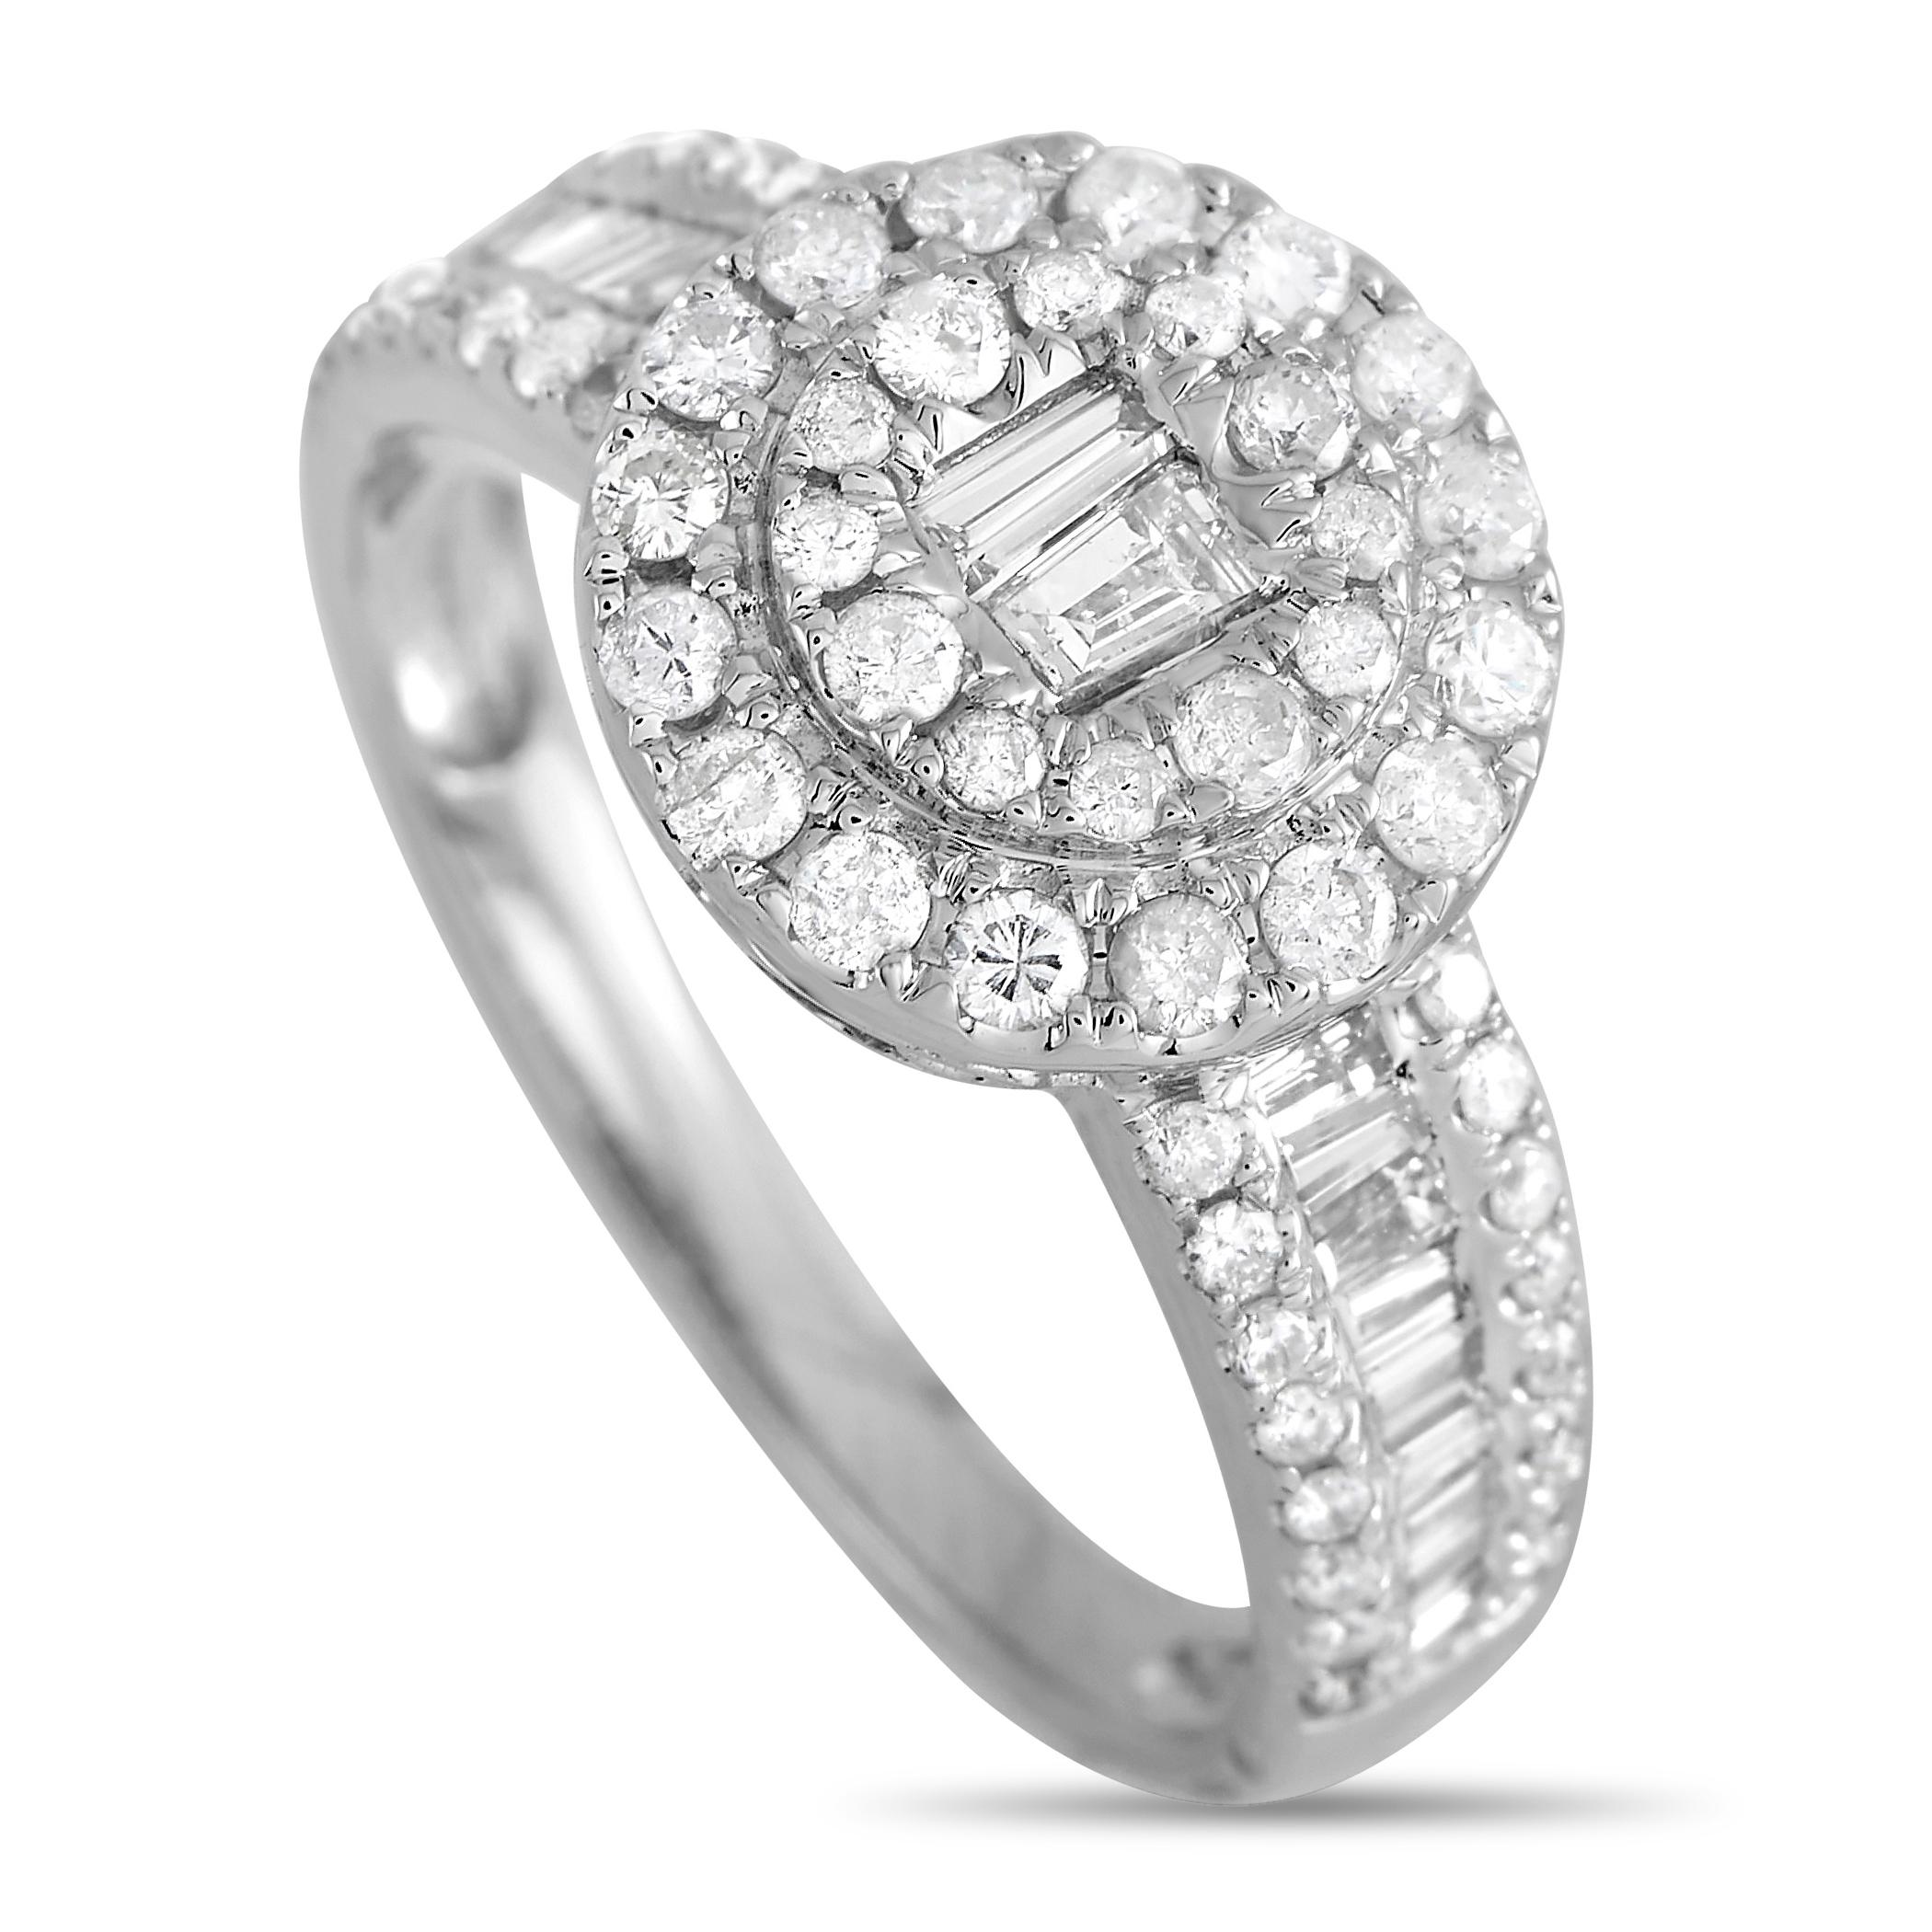 LB Exclusive 14K White Gold 1.00 ct Diamond Ring In New Condition For Sale In Southampton, PA